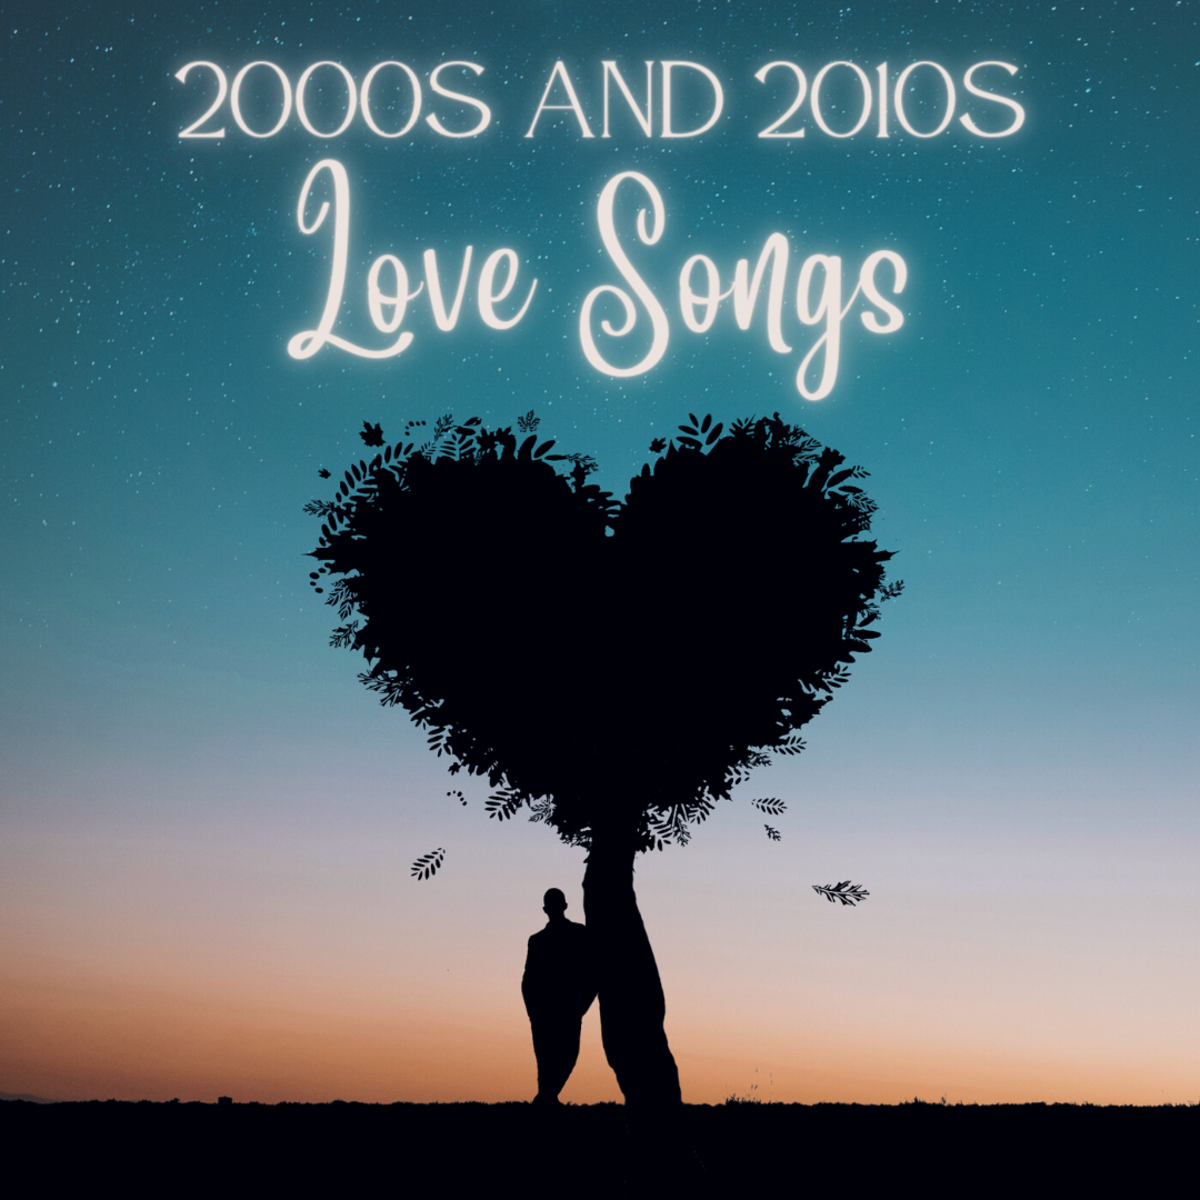 What are the best love songs of the 2000s and 2010s? Read on to find out!